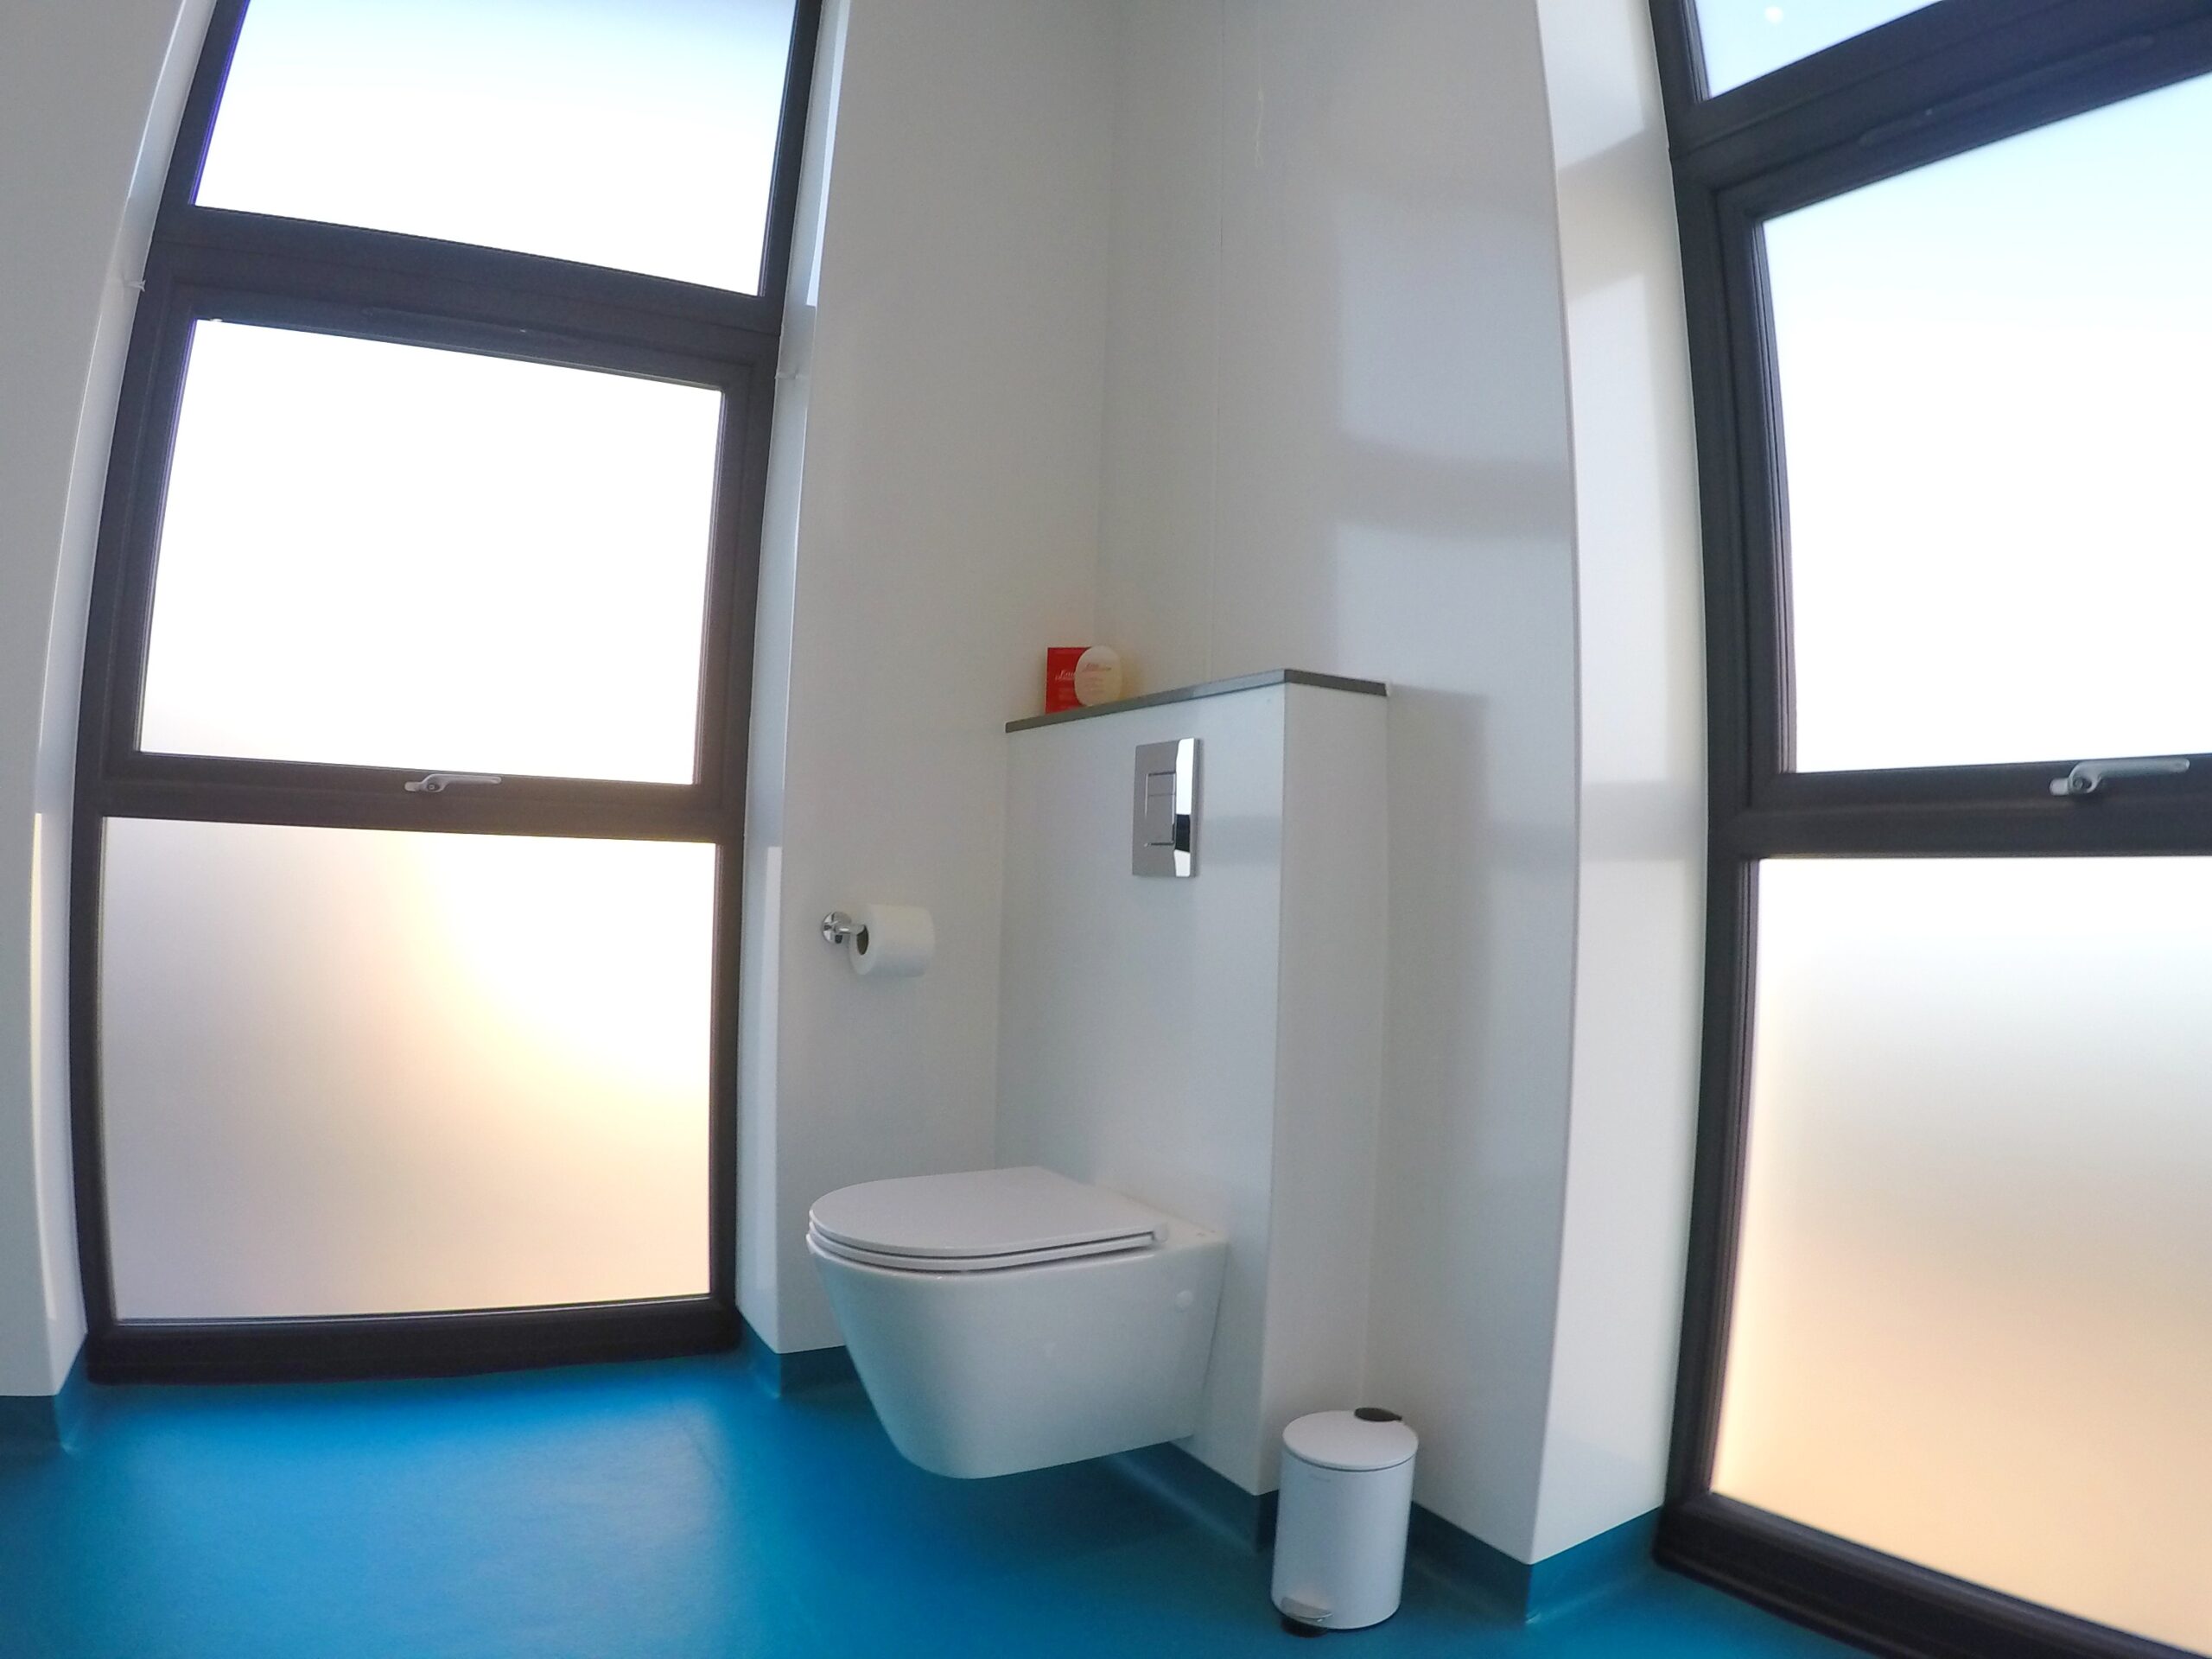 Wall hung WC to wetroom with teal coloured floor. Small bin. Two large frosted windows.